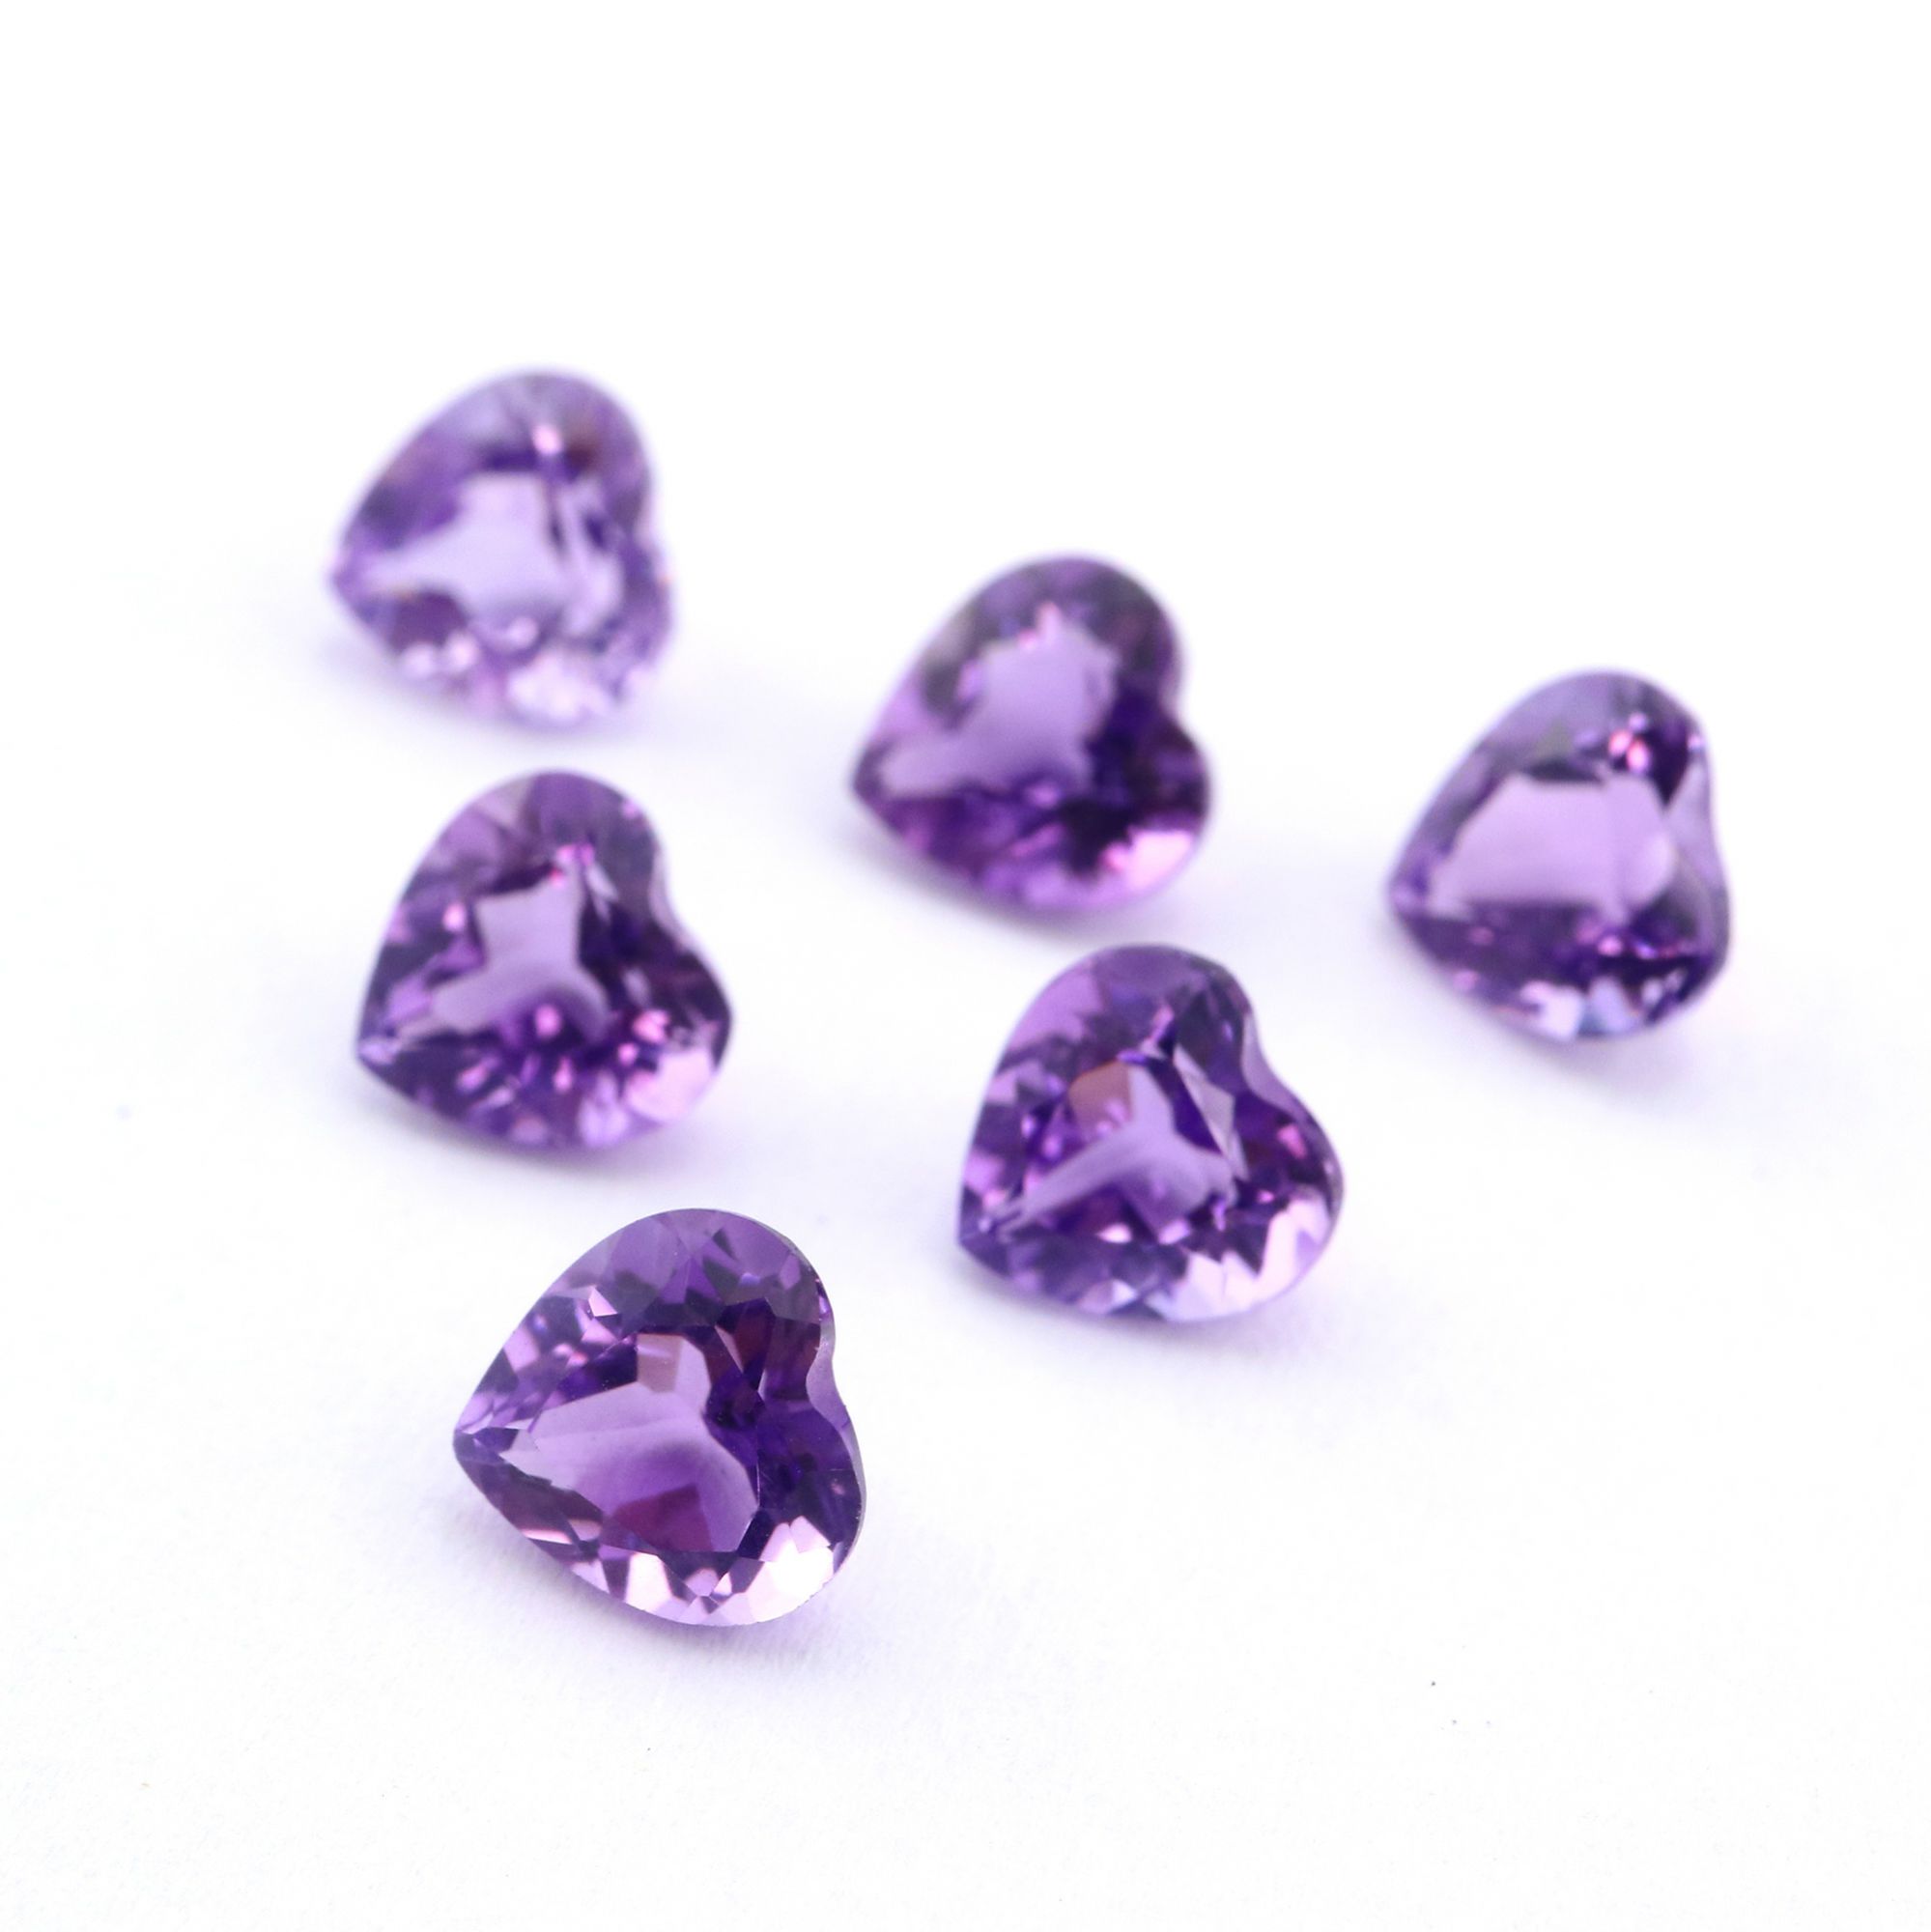 5Pcs Heart Purple Amethyst February Birthstone Faceted Cut Loose Gemstone Nature Semi Precious Stone DIY Jewelry Supplies 4130015 - Click Image to Close